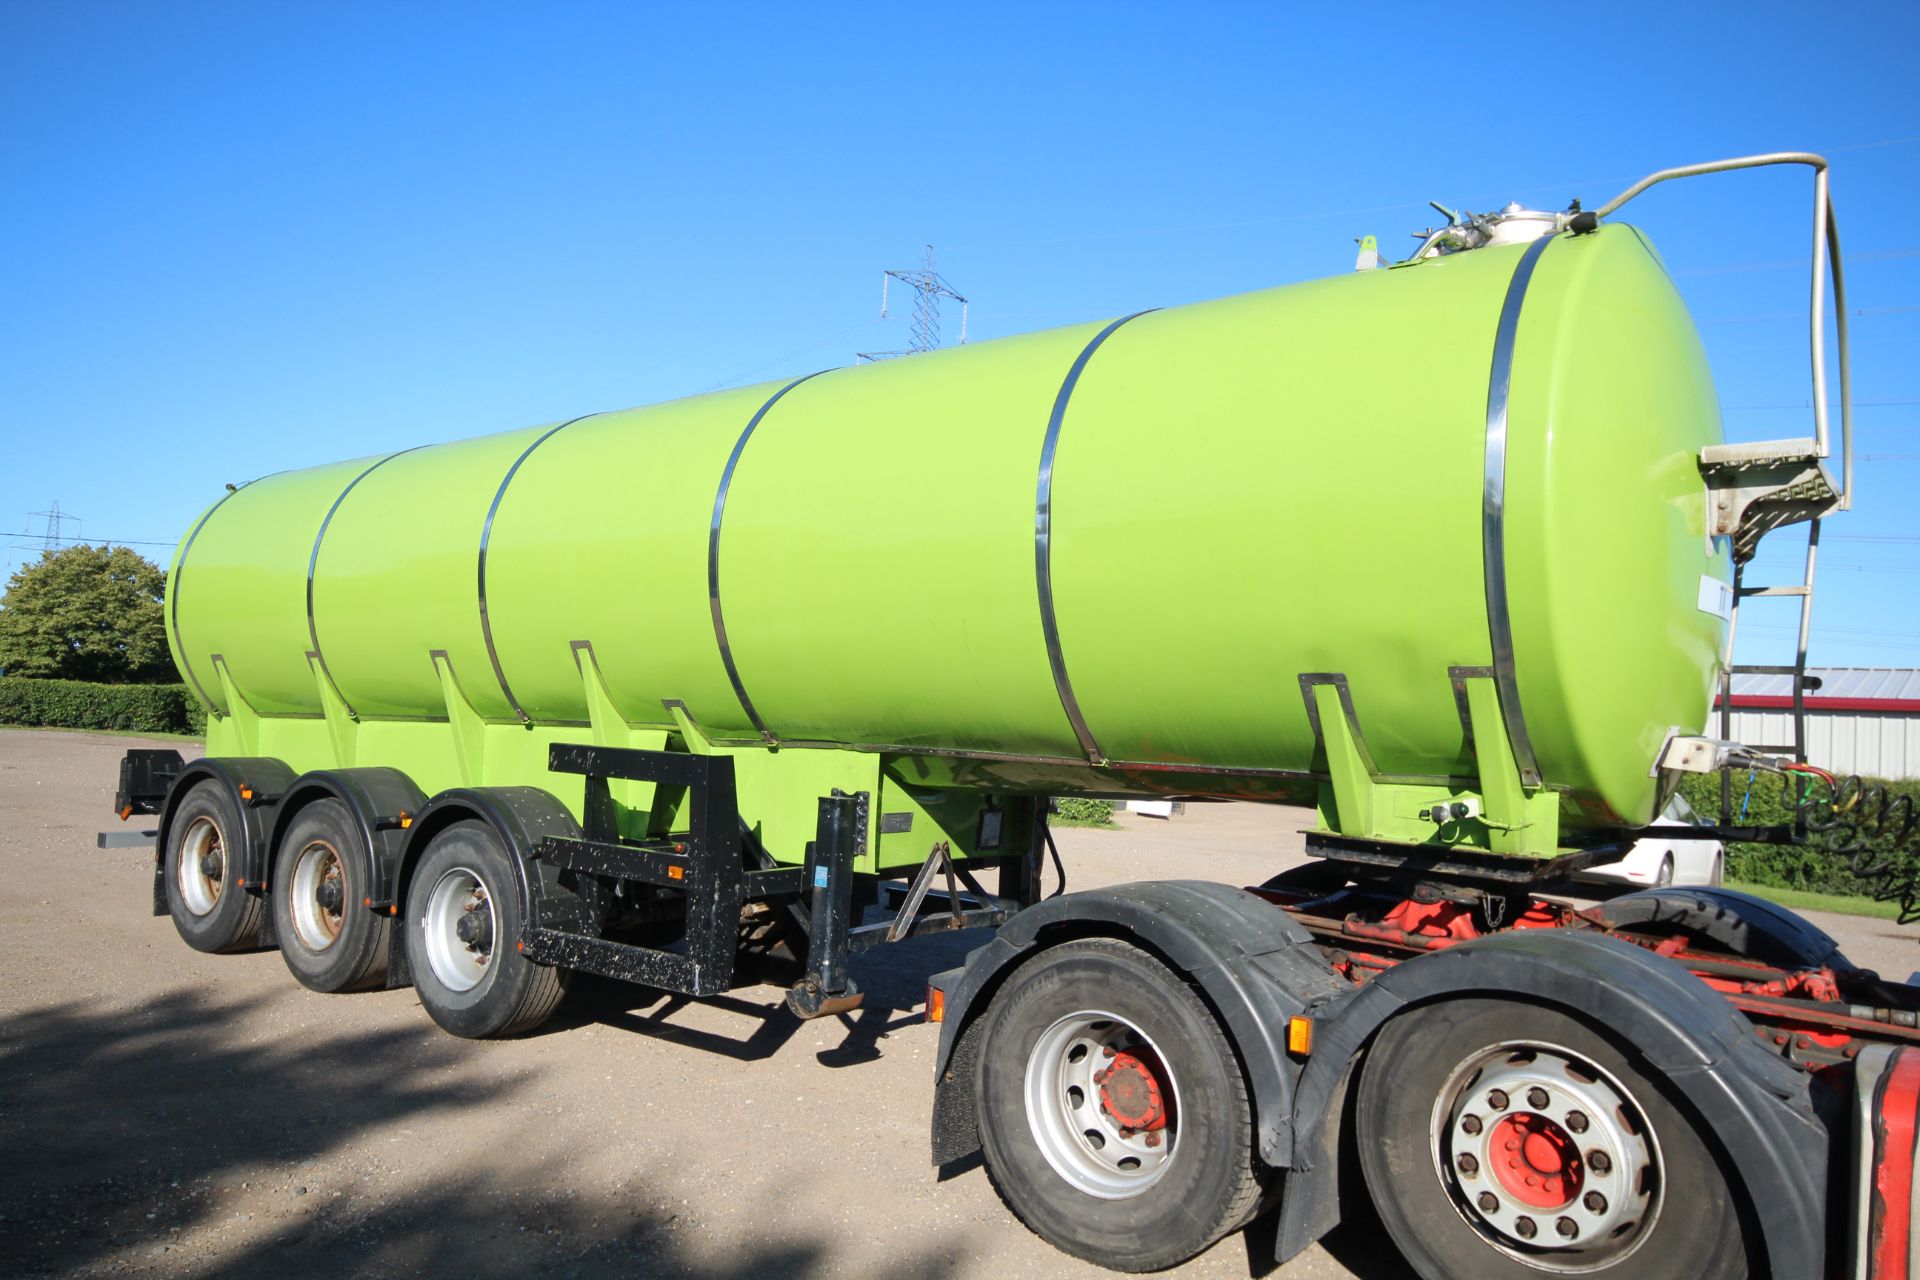 Dairy Products Transport 24,575L stainless steel tri-axle tanker. Registration A160342. Date of